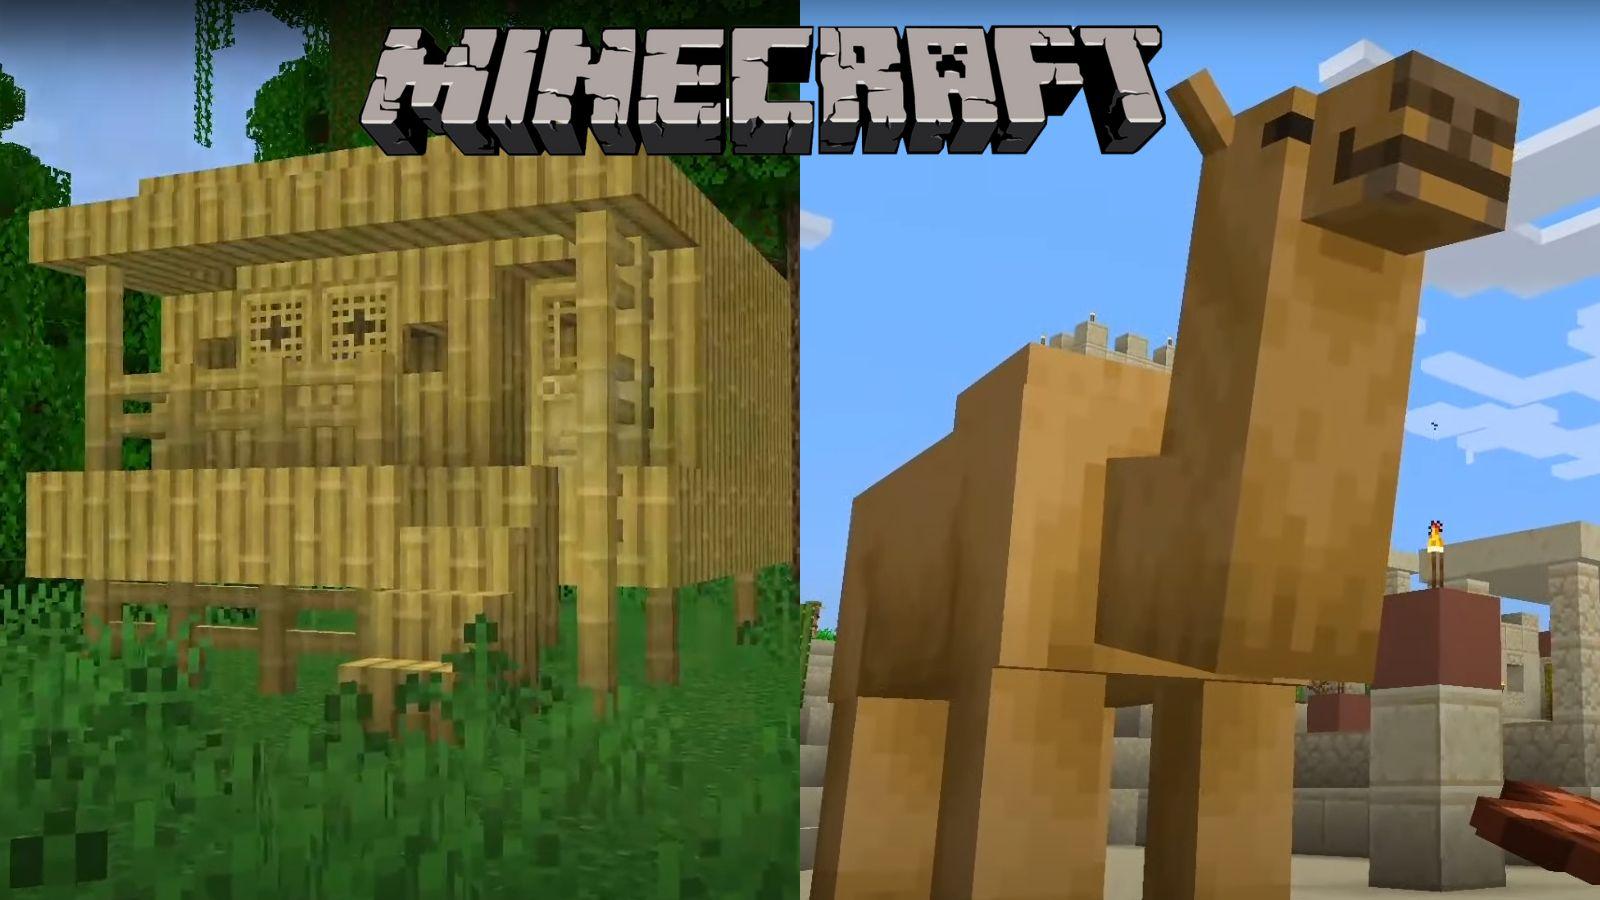 Minecraft bamboo house and camel 1.20 update